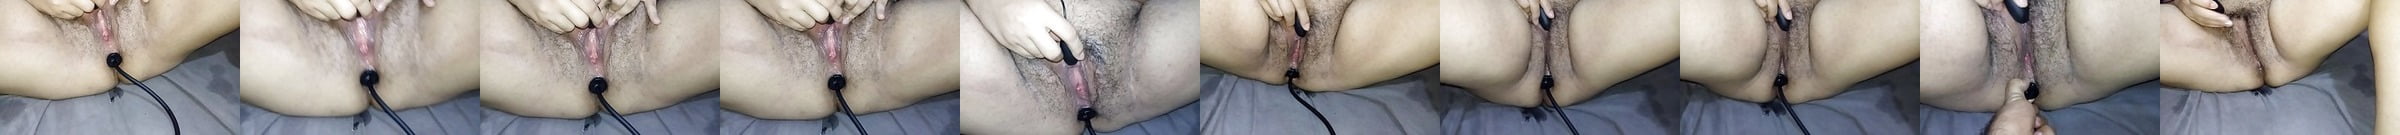 Featured Only Anal Porn Videos 8 Xhamster